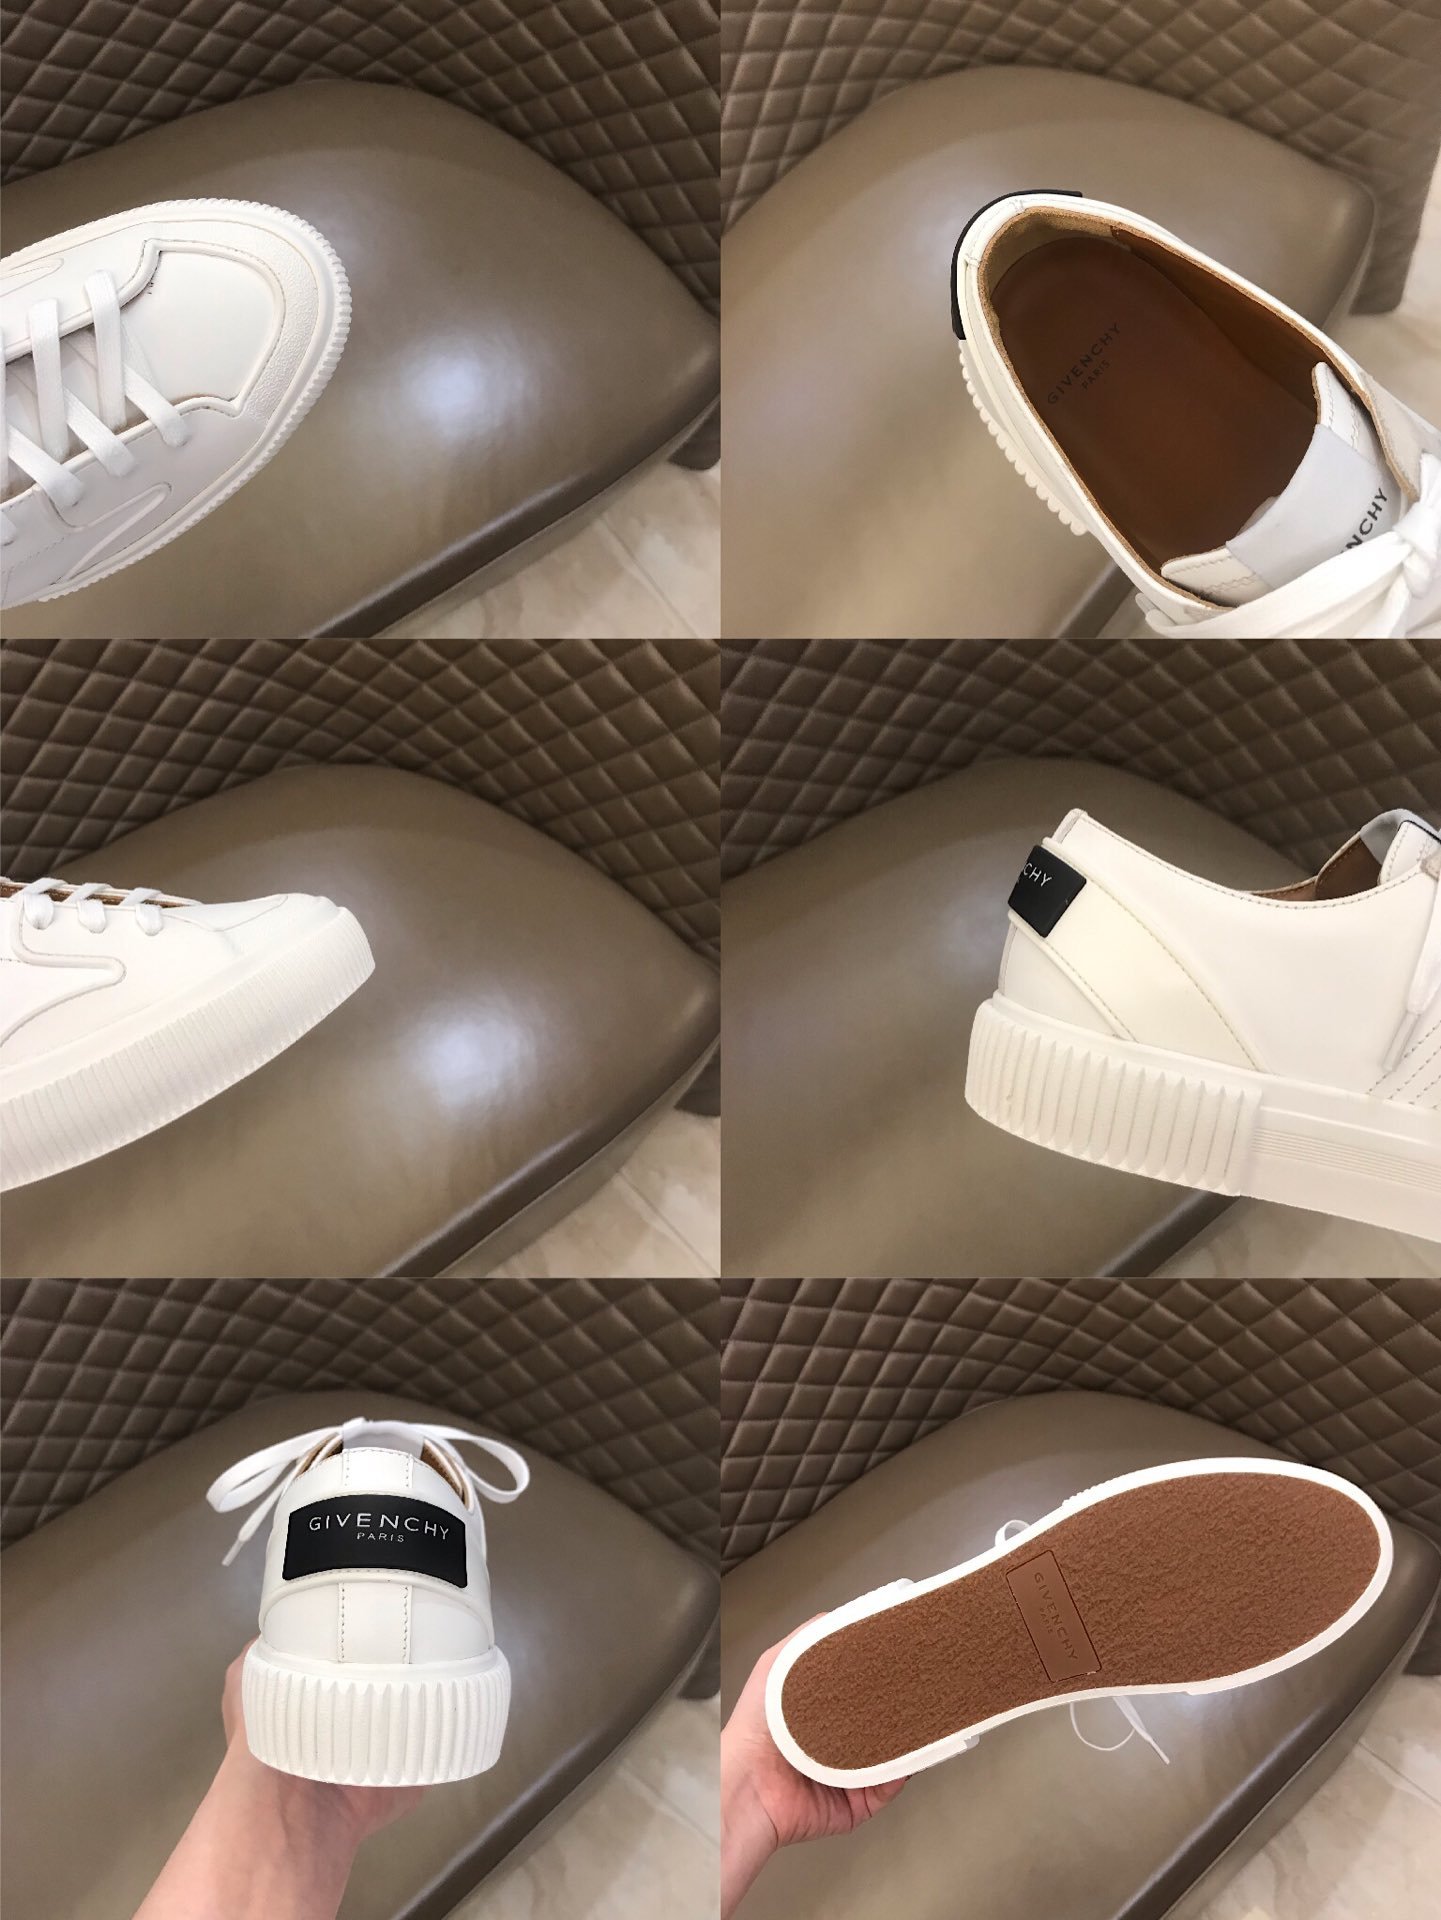 Givenchy High Quality Sneakers White and White rubber sole with black heel MS021143